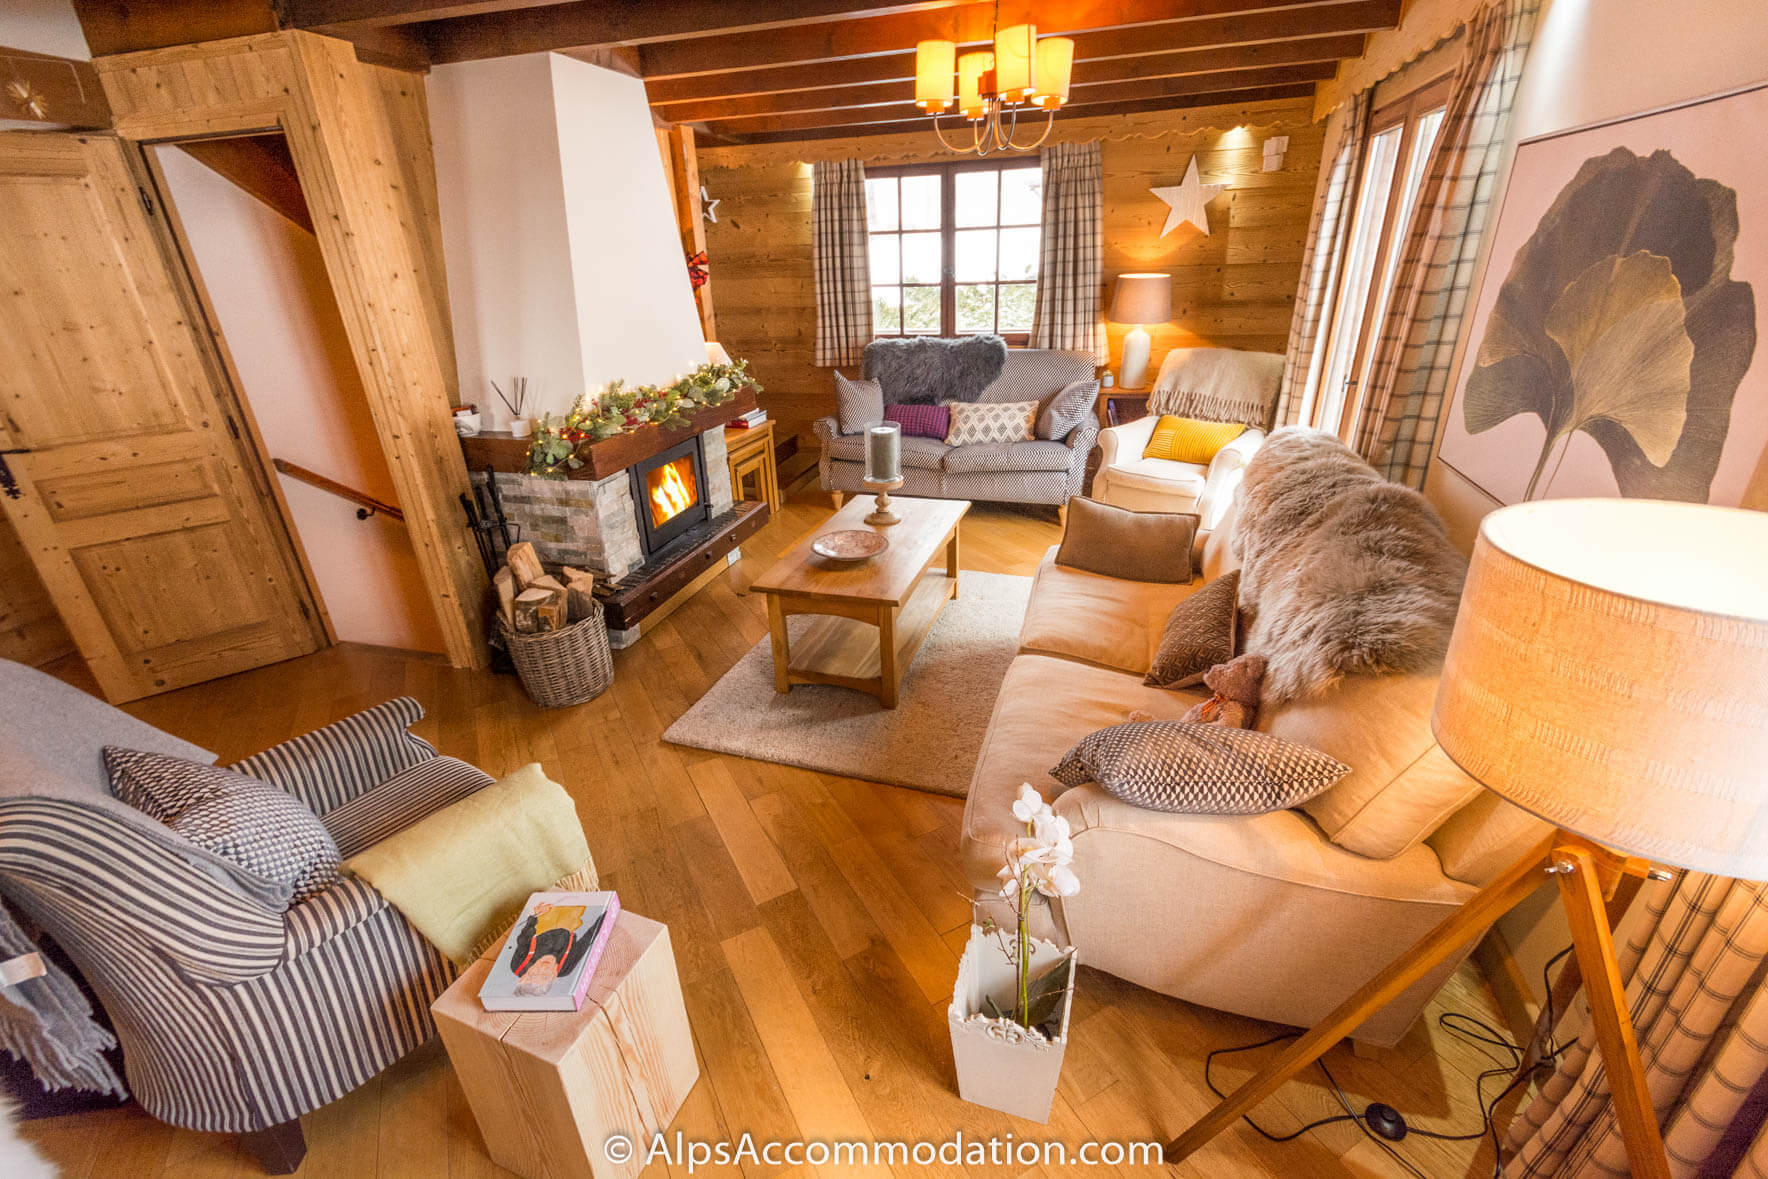 Chalet Étoile Morillon - The chalet features a living area with log fire and a separate snug with TV